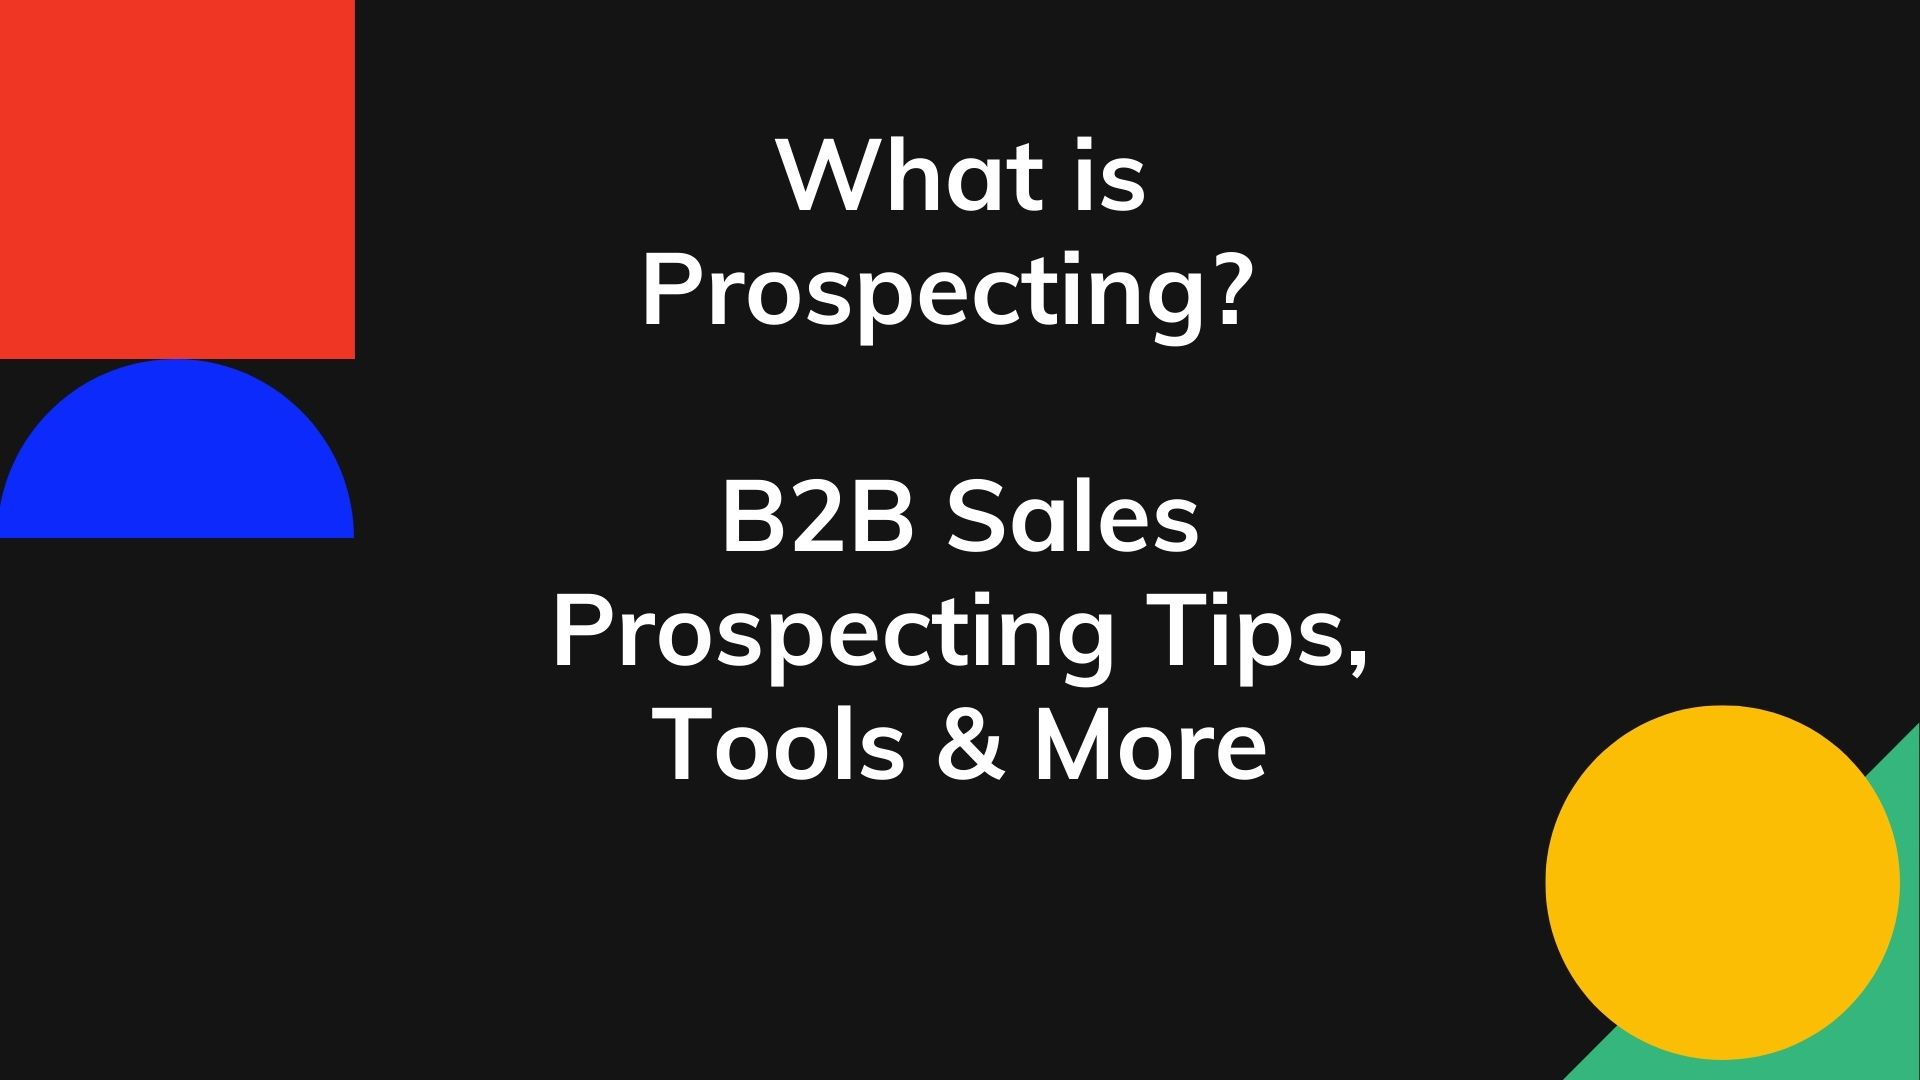 What is Prospecting? B2B Sales Prospecting Tips, Tools & More